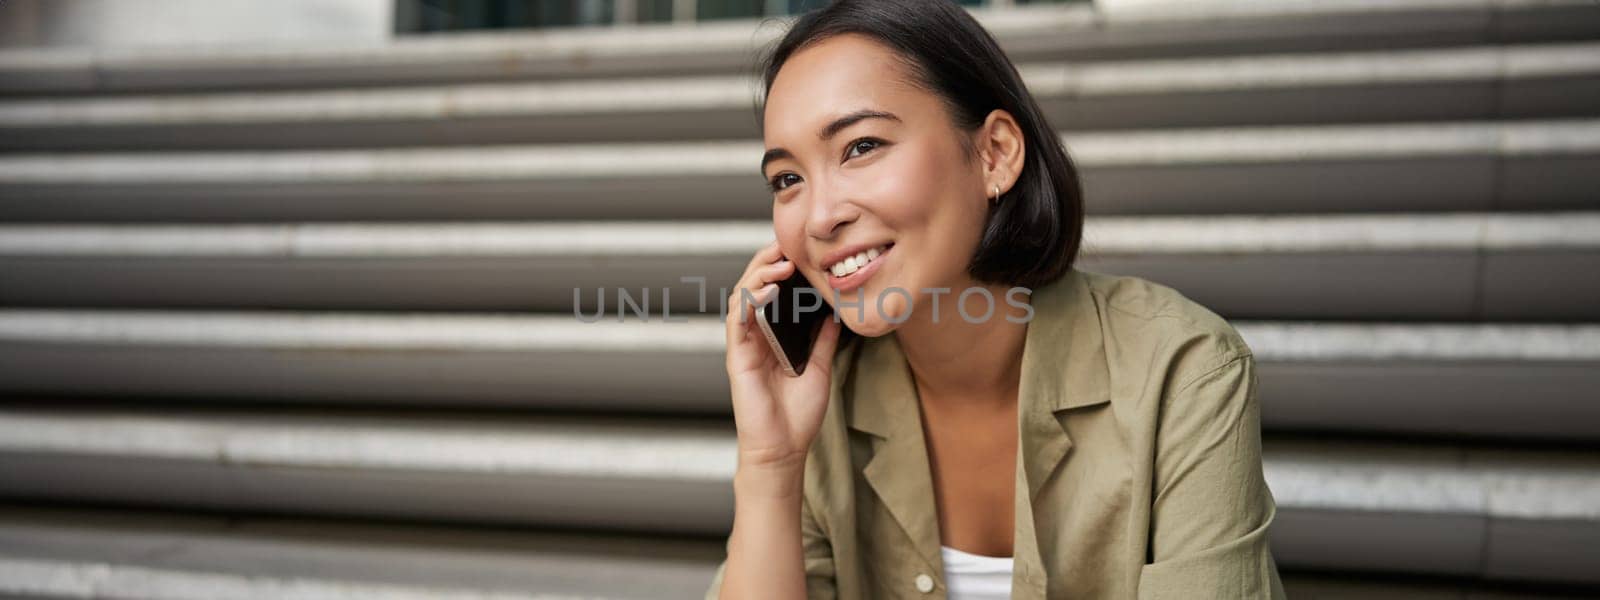 Portrait of beautiful asian girl talks on mobile phone, sits on street stairs. Woman with smartphone smiling, making a call.